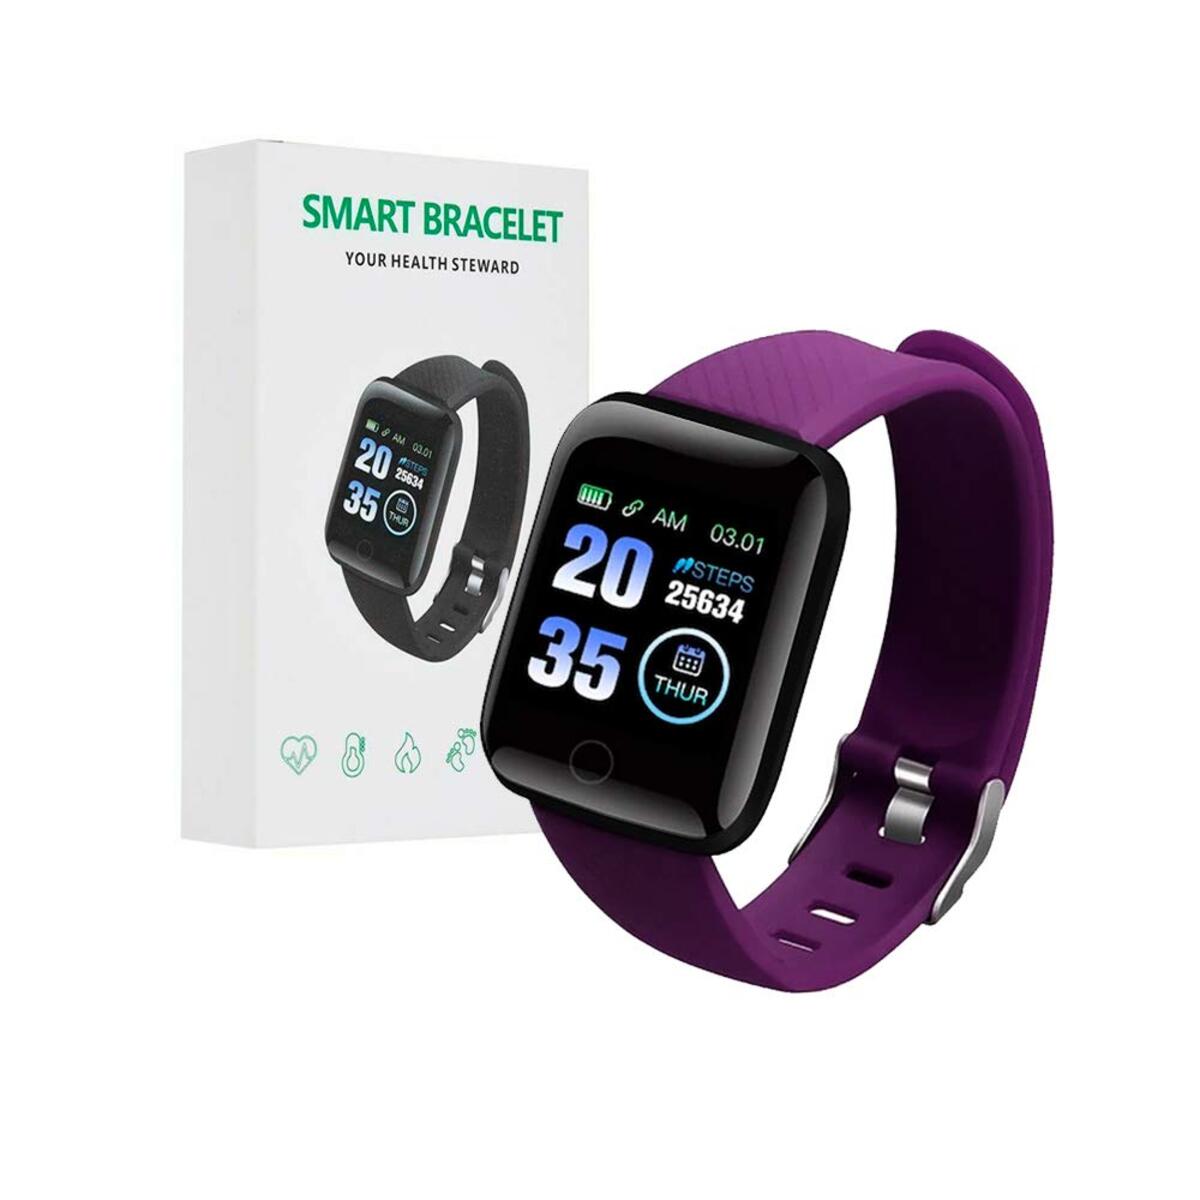 Charging The “Your Health Steward” Smart Bracelet: Quick Guide